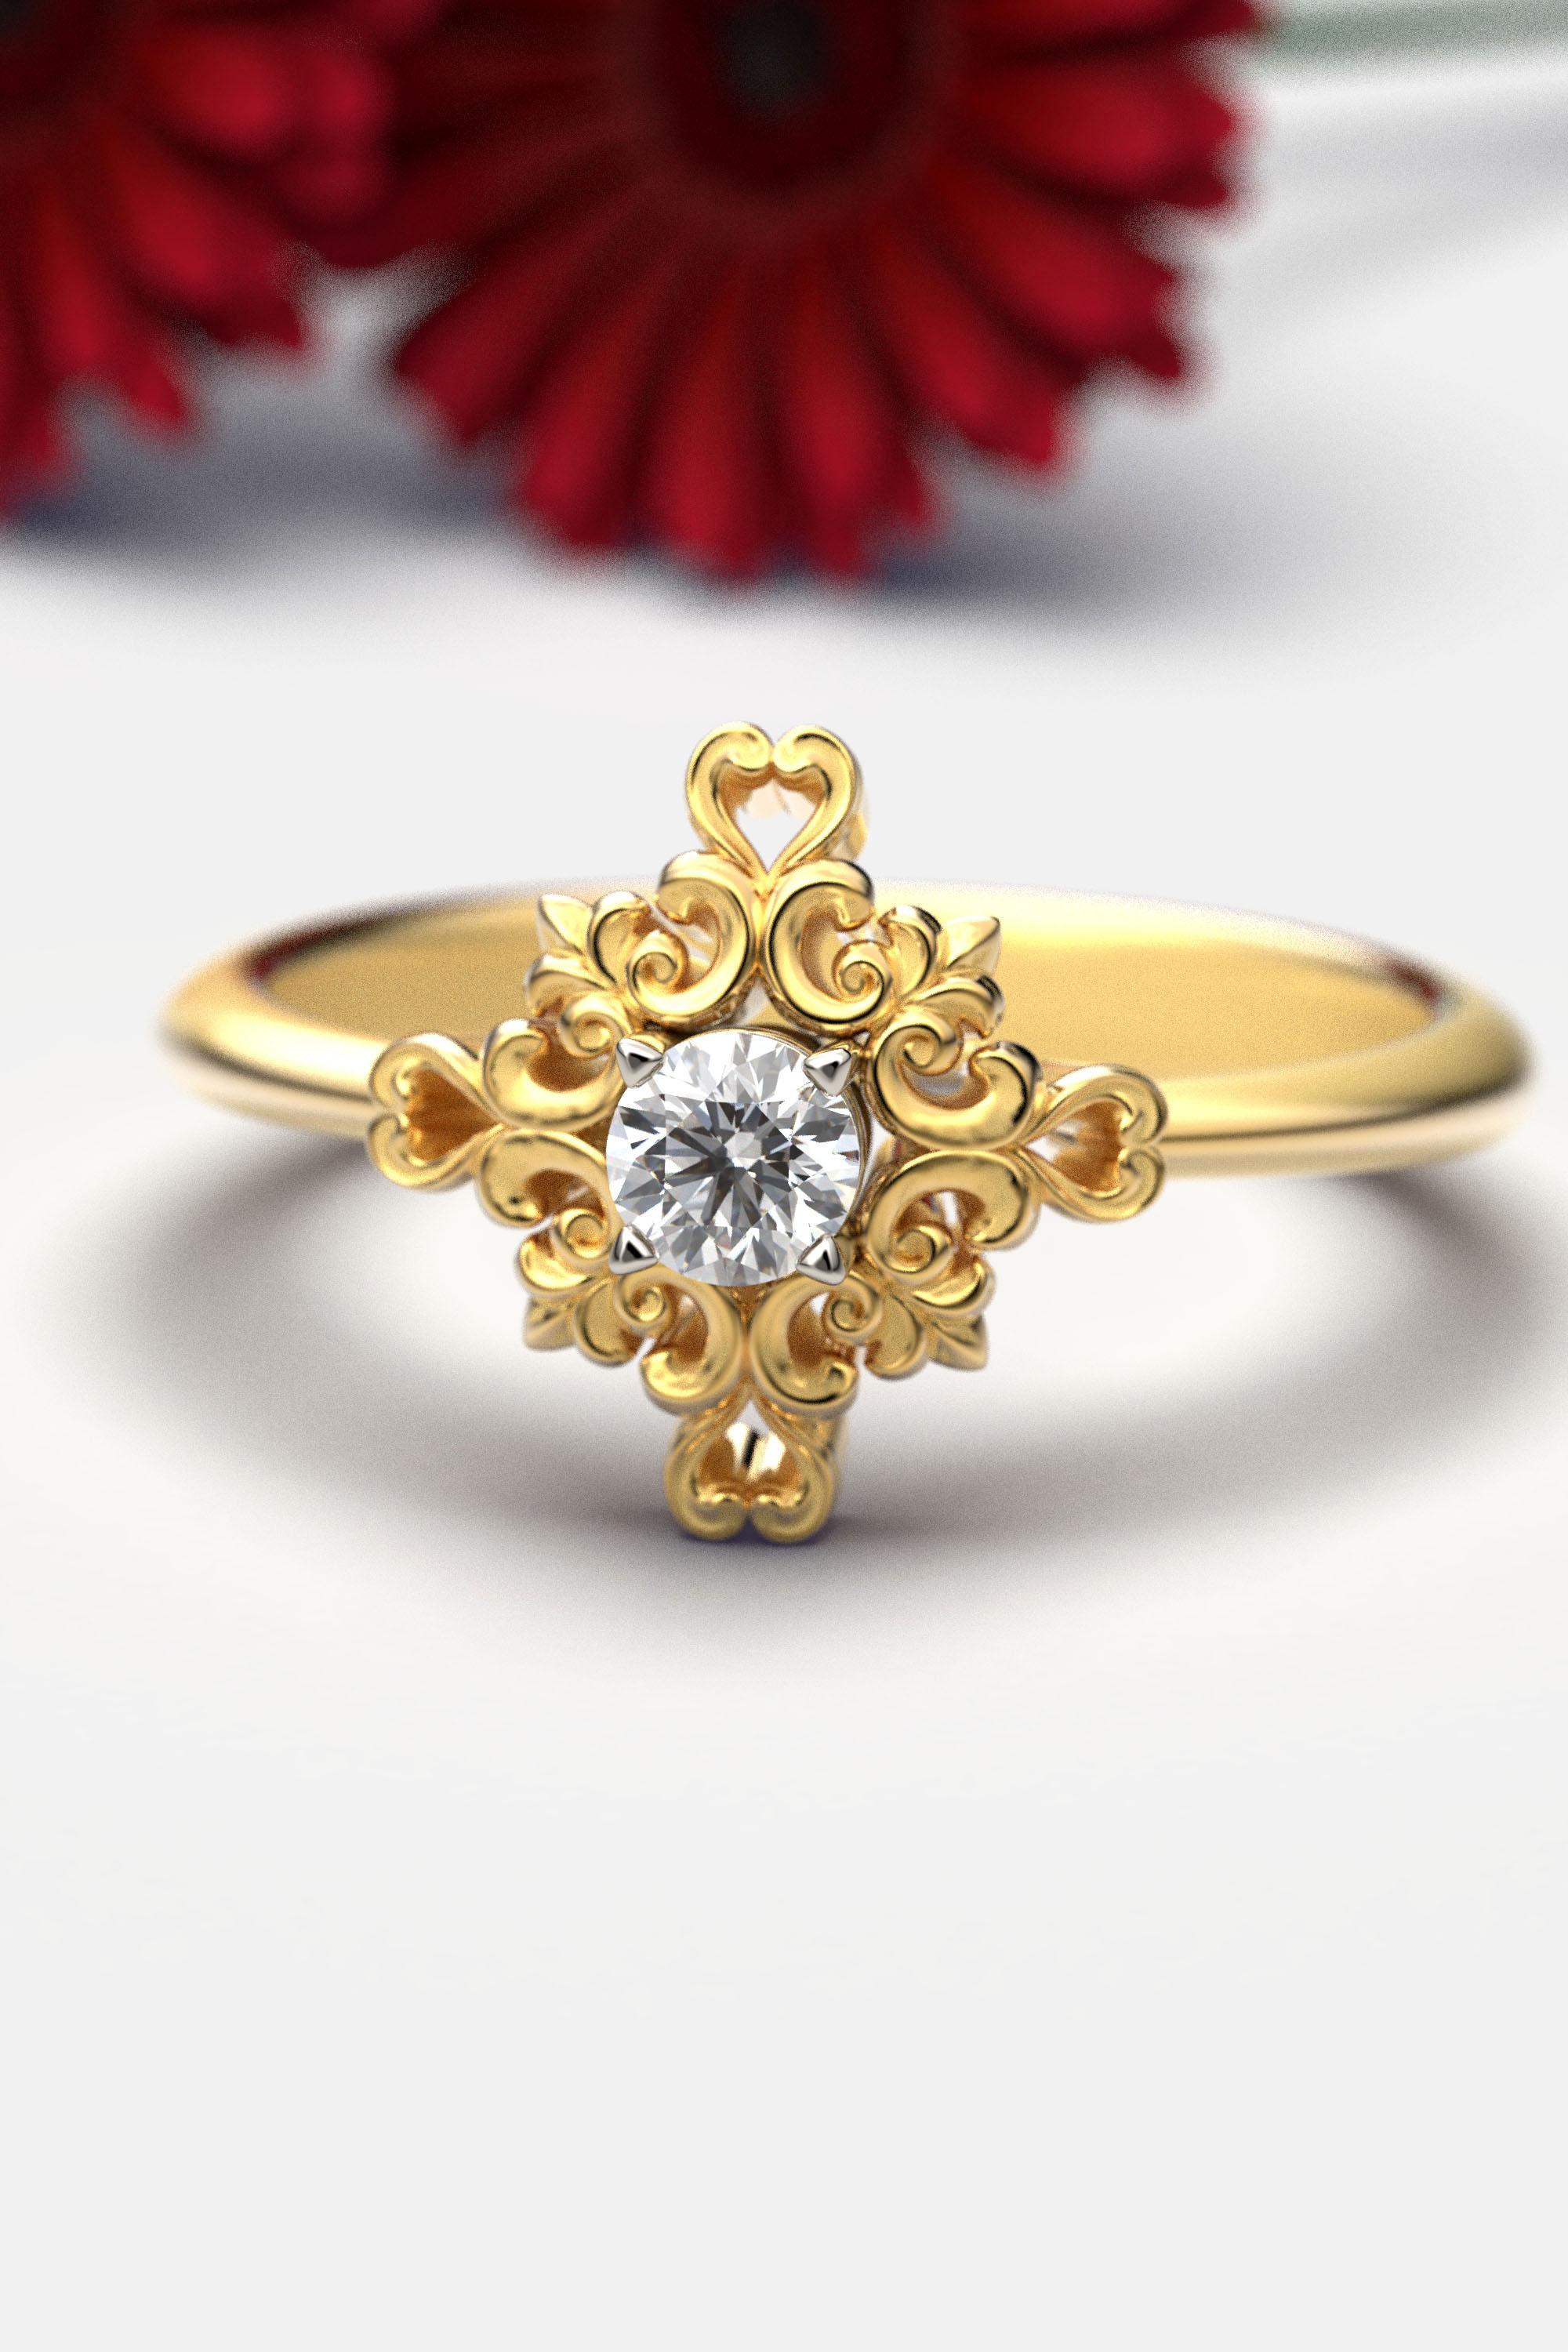 For Sale:  Italian Diamond Engagement Ring with Baroque Setting 18k gold 2